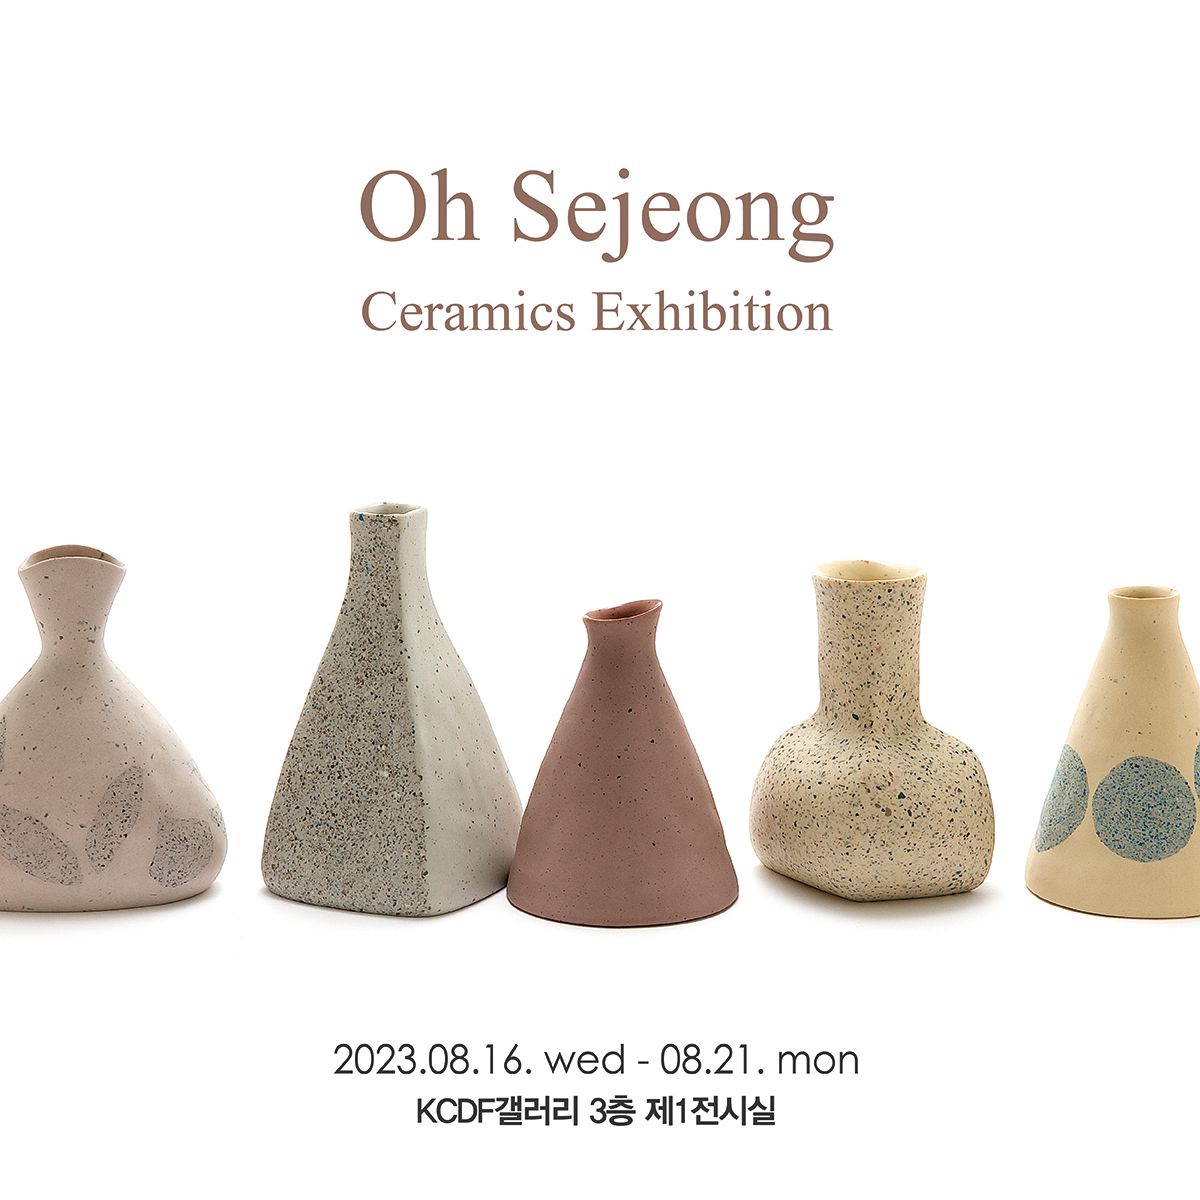 Oh Sejeong Ceramics Exhibition 2023.08.16.wed-08.21.mon KCDF갤러리 3층 제1전시실